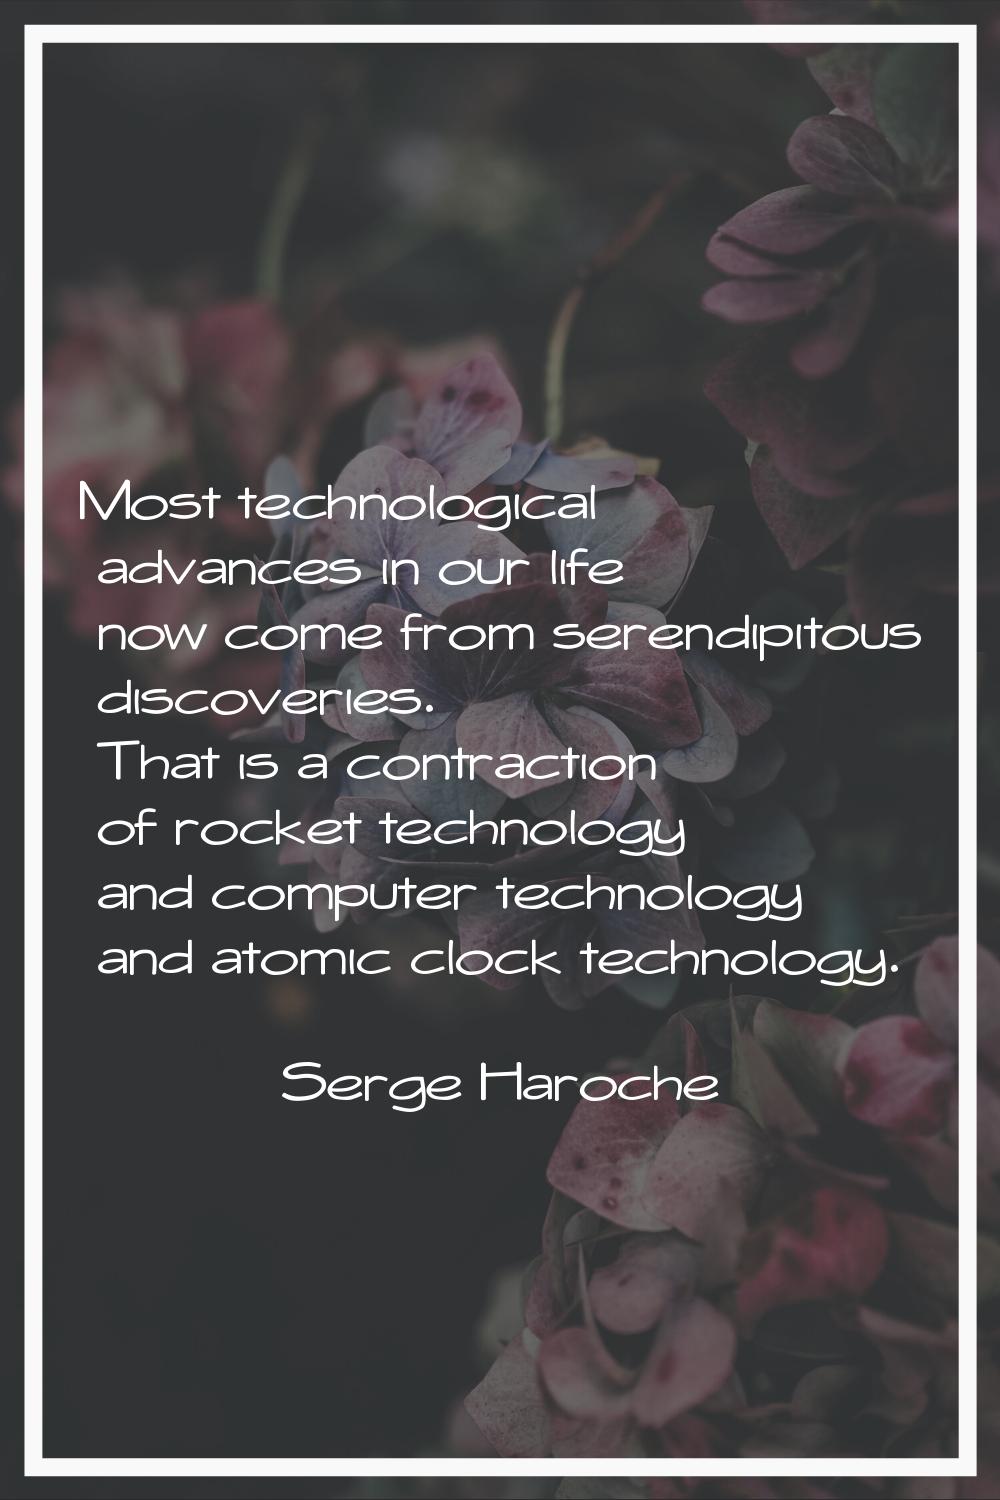 Most technological advances in our life now come from serendipitous discoveries. That is a contract